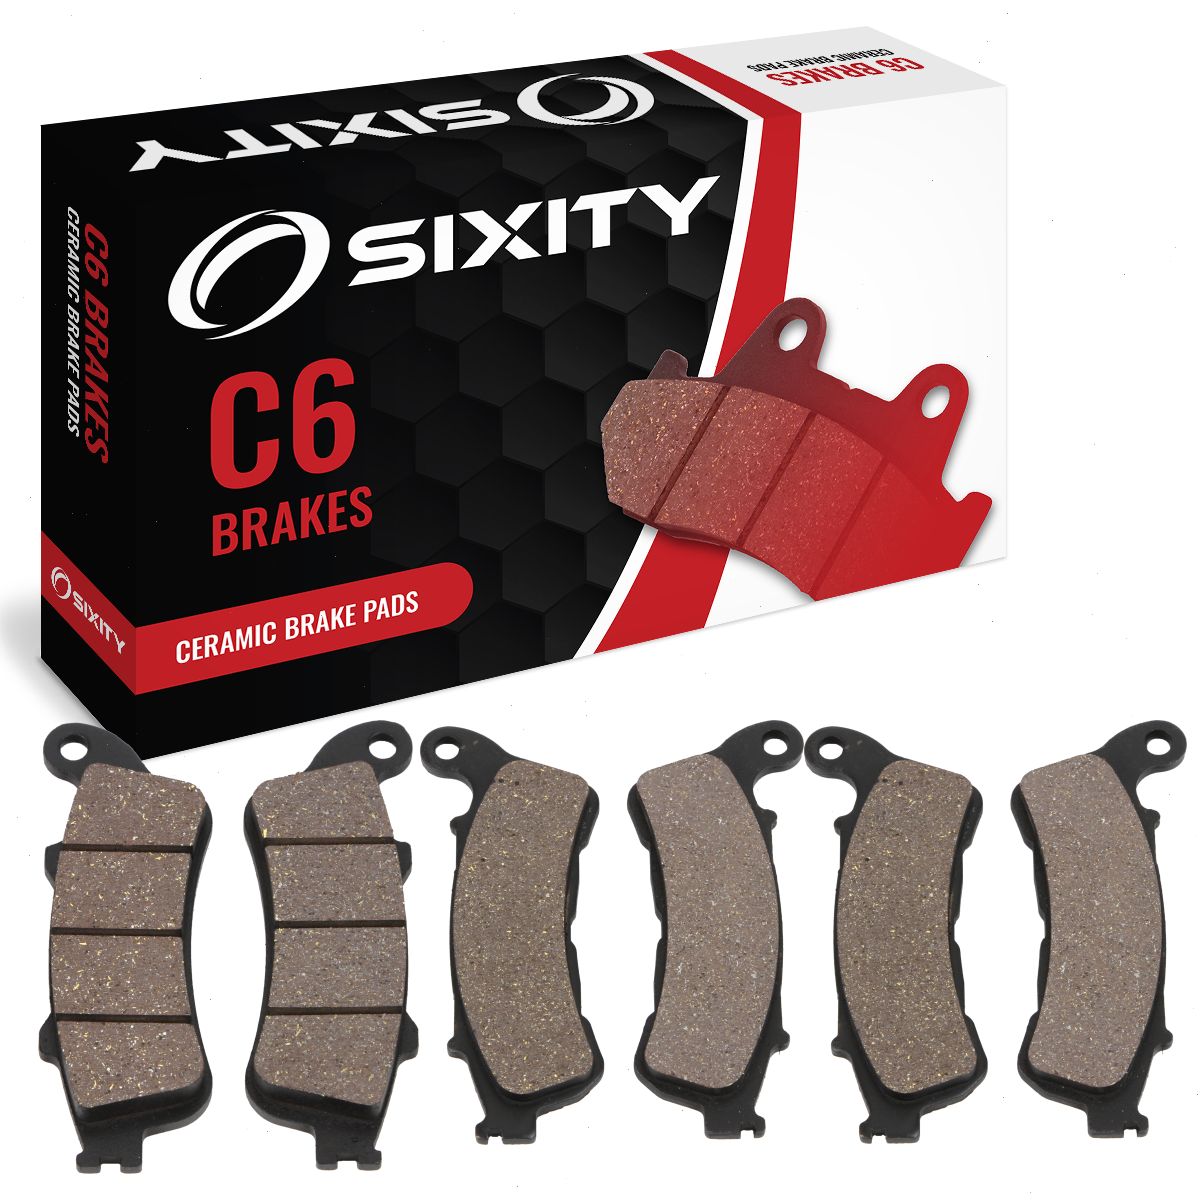 sixity products